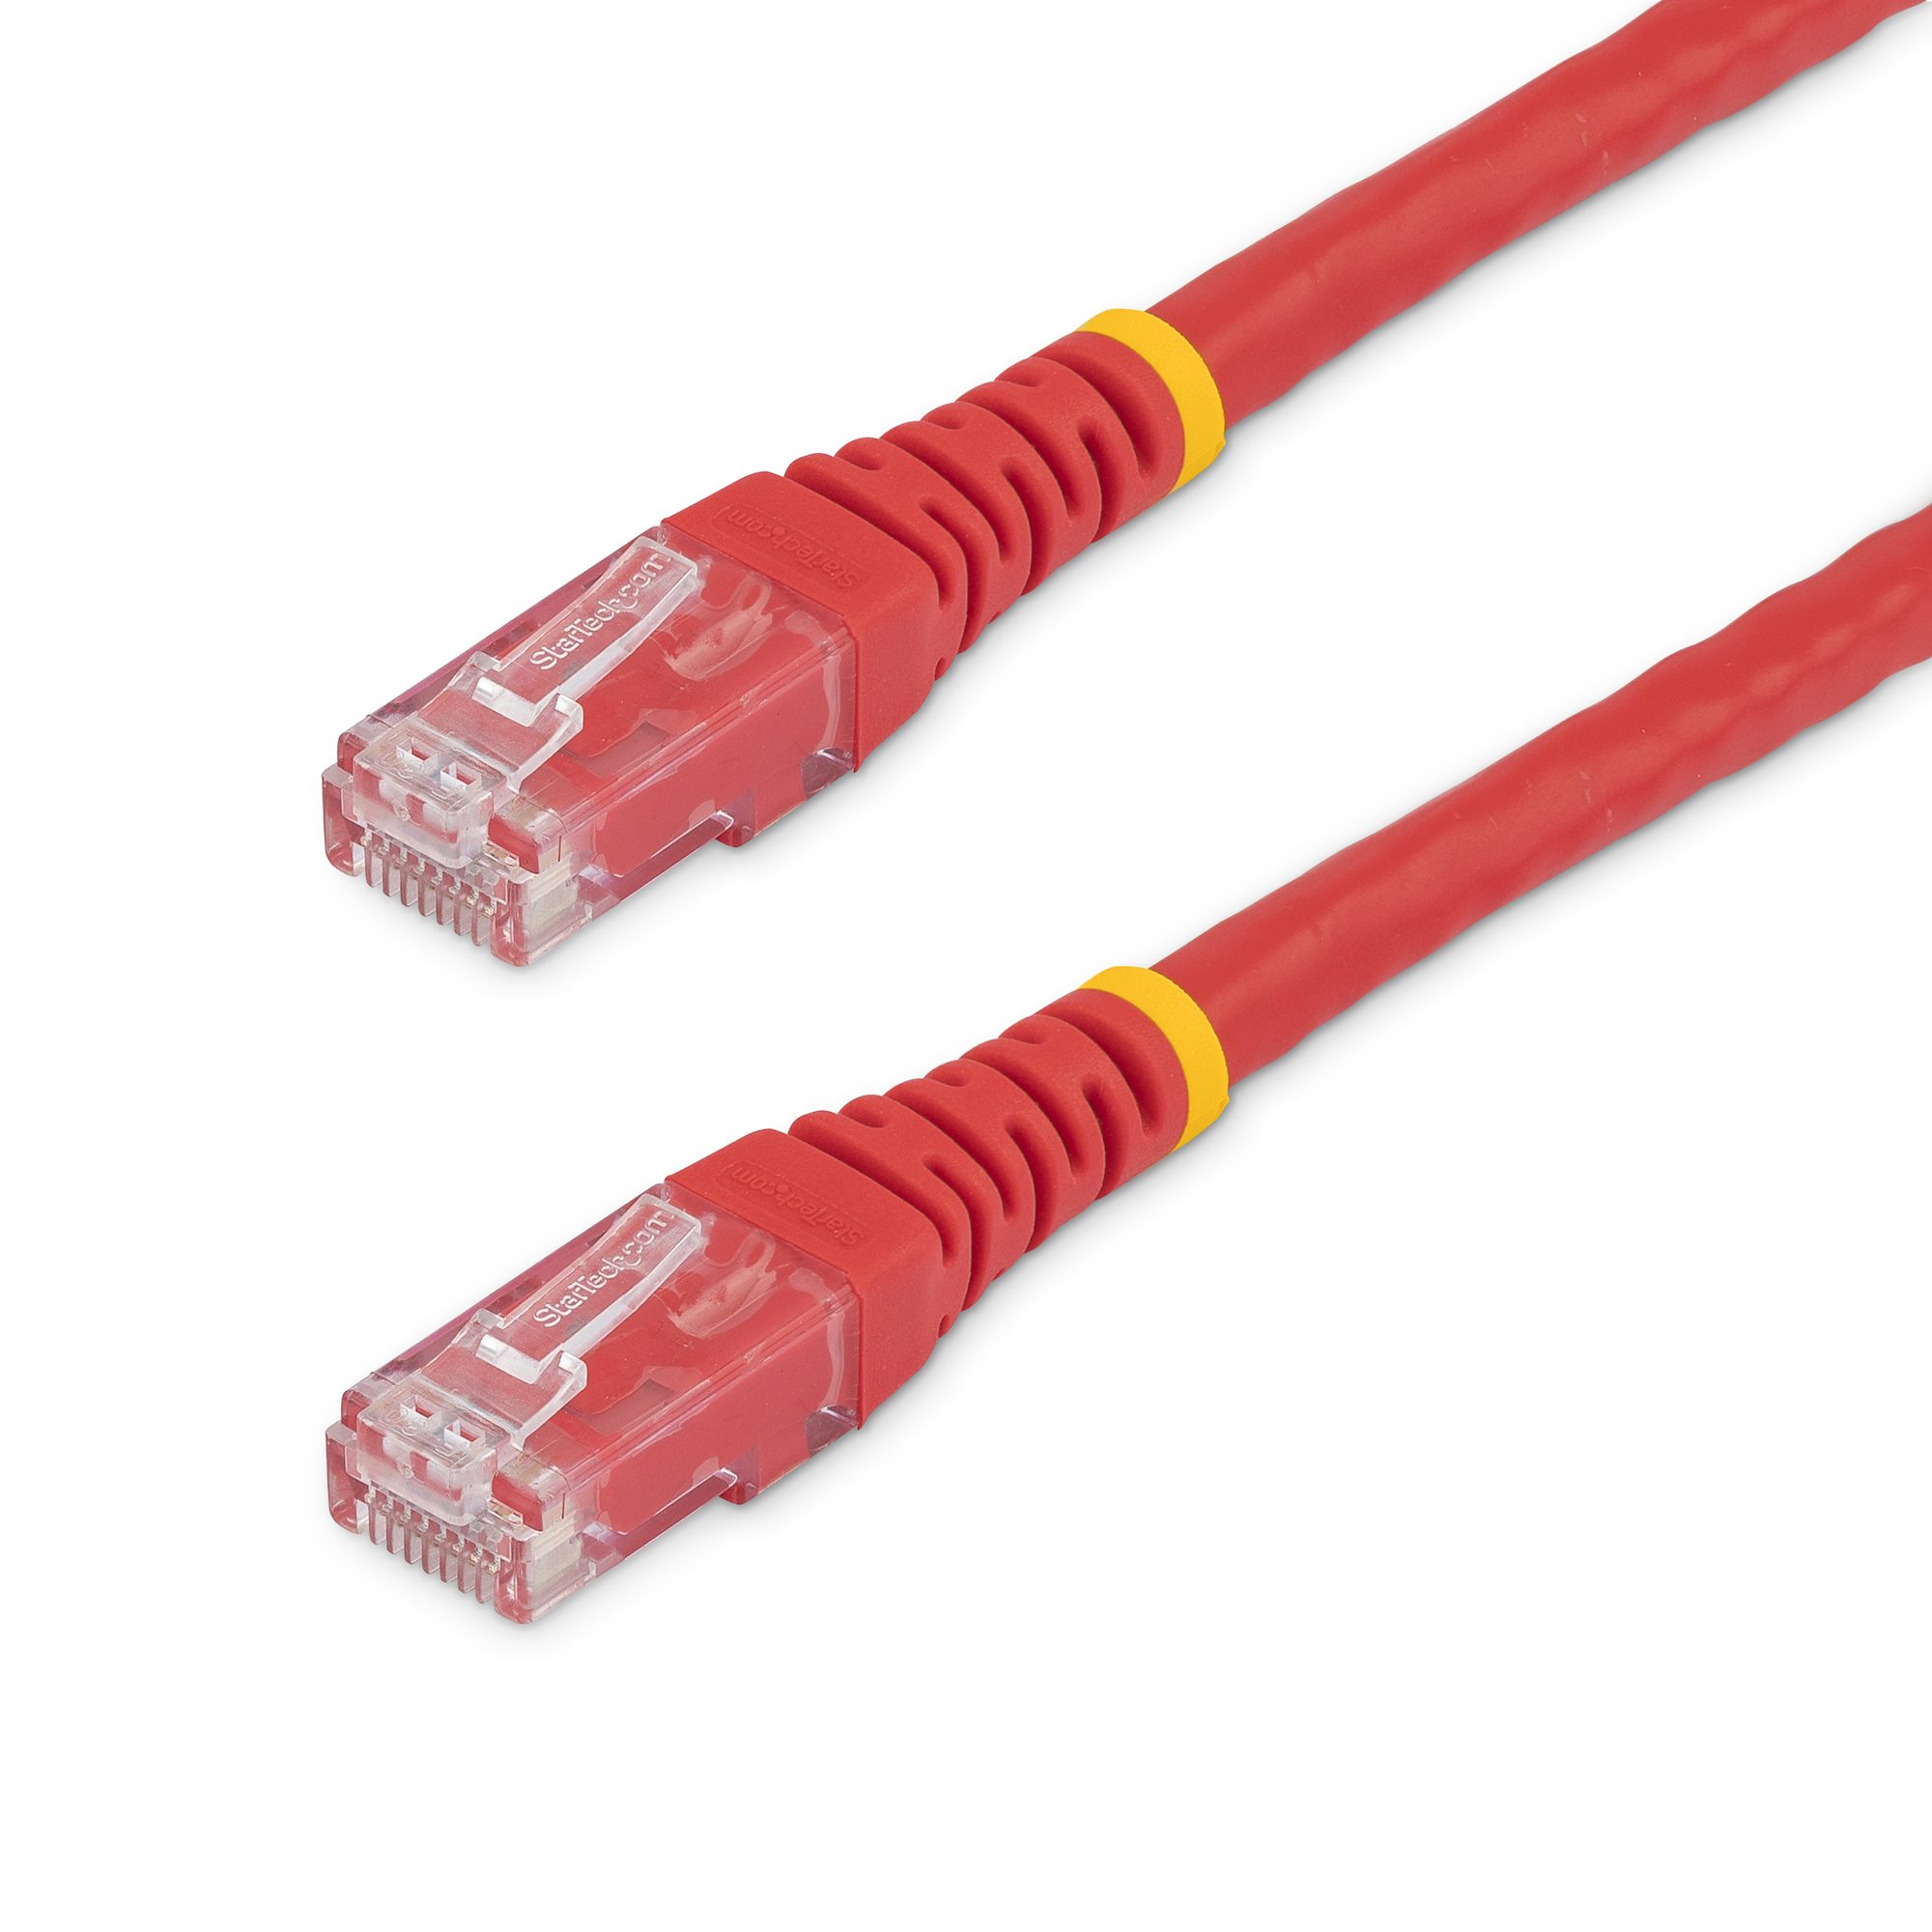 GearIT Cat6 Network Cable Copper Clad Aluminum (CCA) Outdoor Ethernet  Cable, 200 ft.